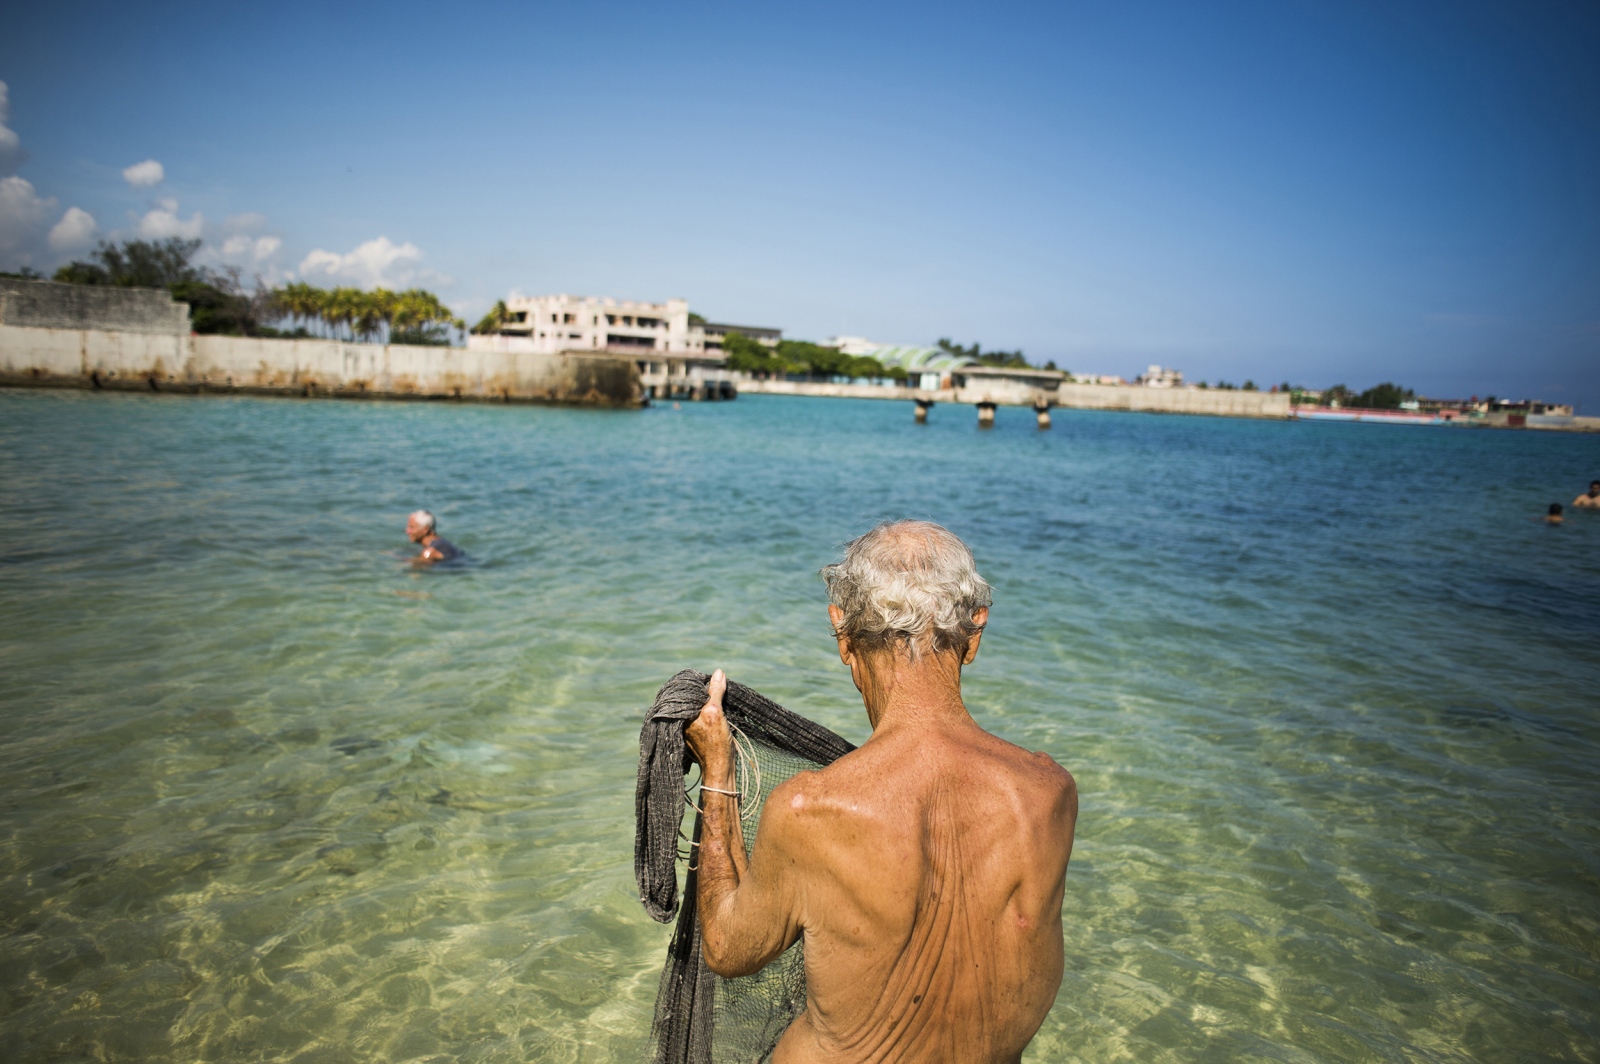 Â¡Cuba Libre! - A man fishes with an old, traditional fishing net behind...